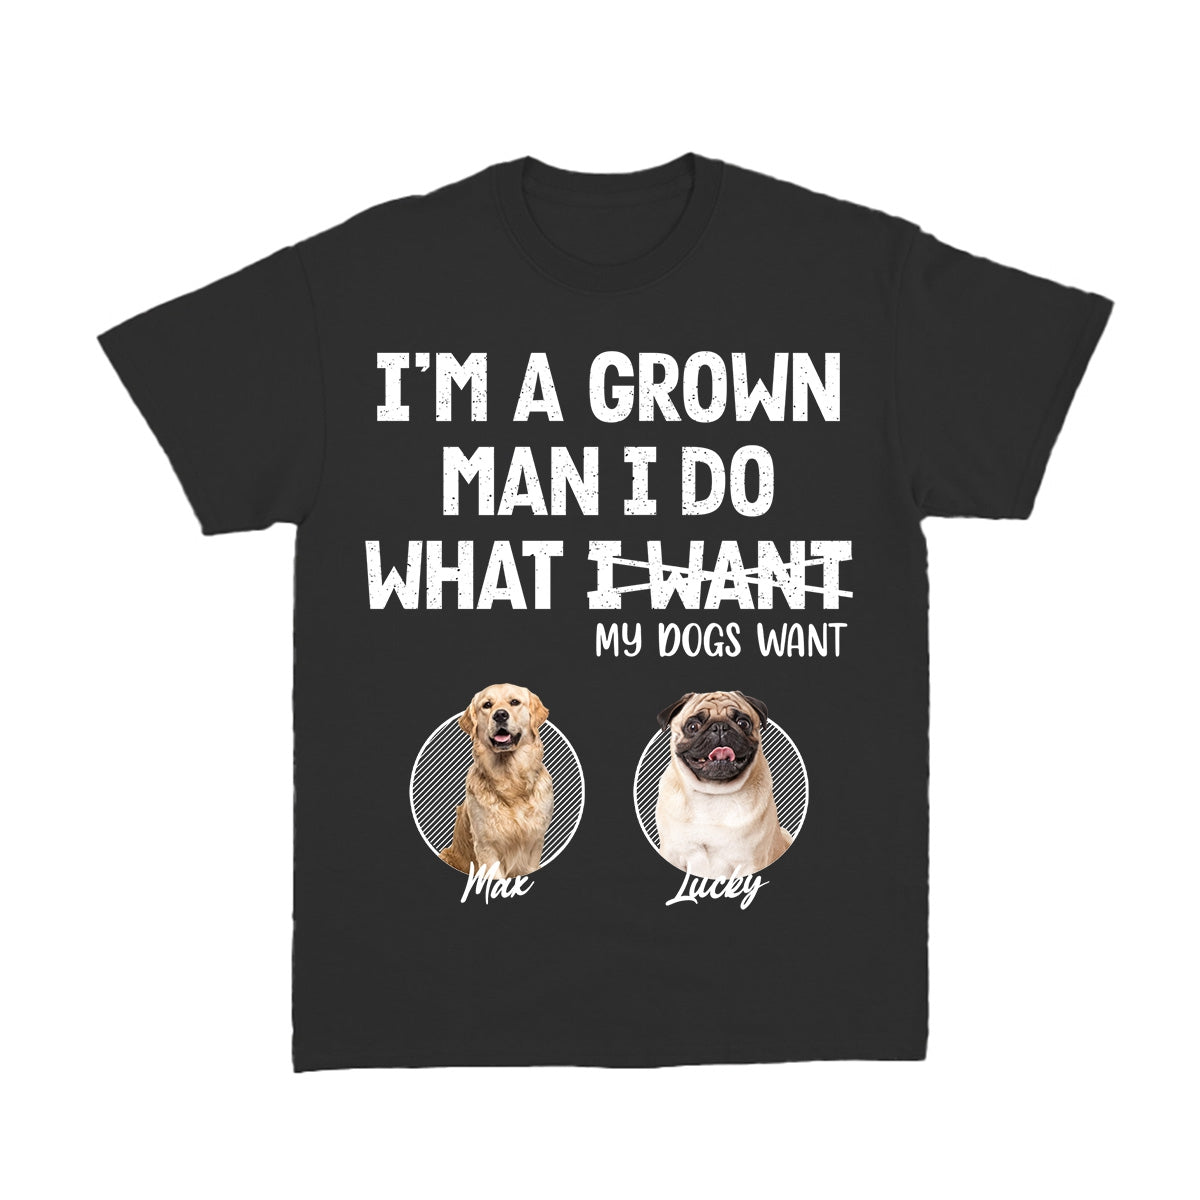 Personalized Pure Cotton T-shirt Gift For Pet Lover - I'm A Grown Man, I Do What My Pet Wants